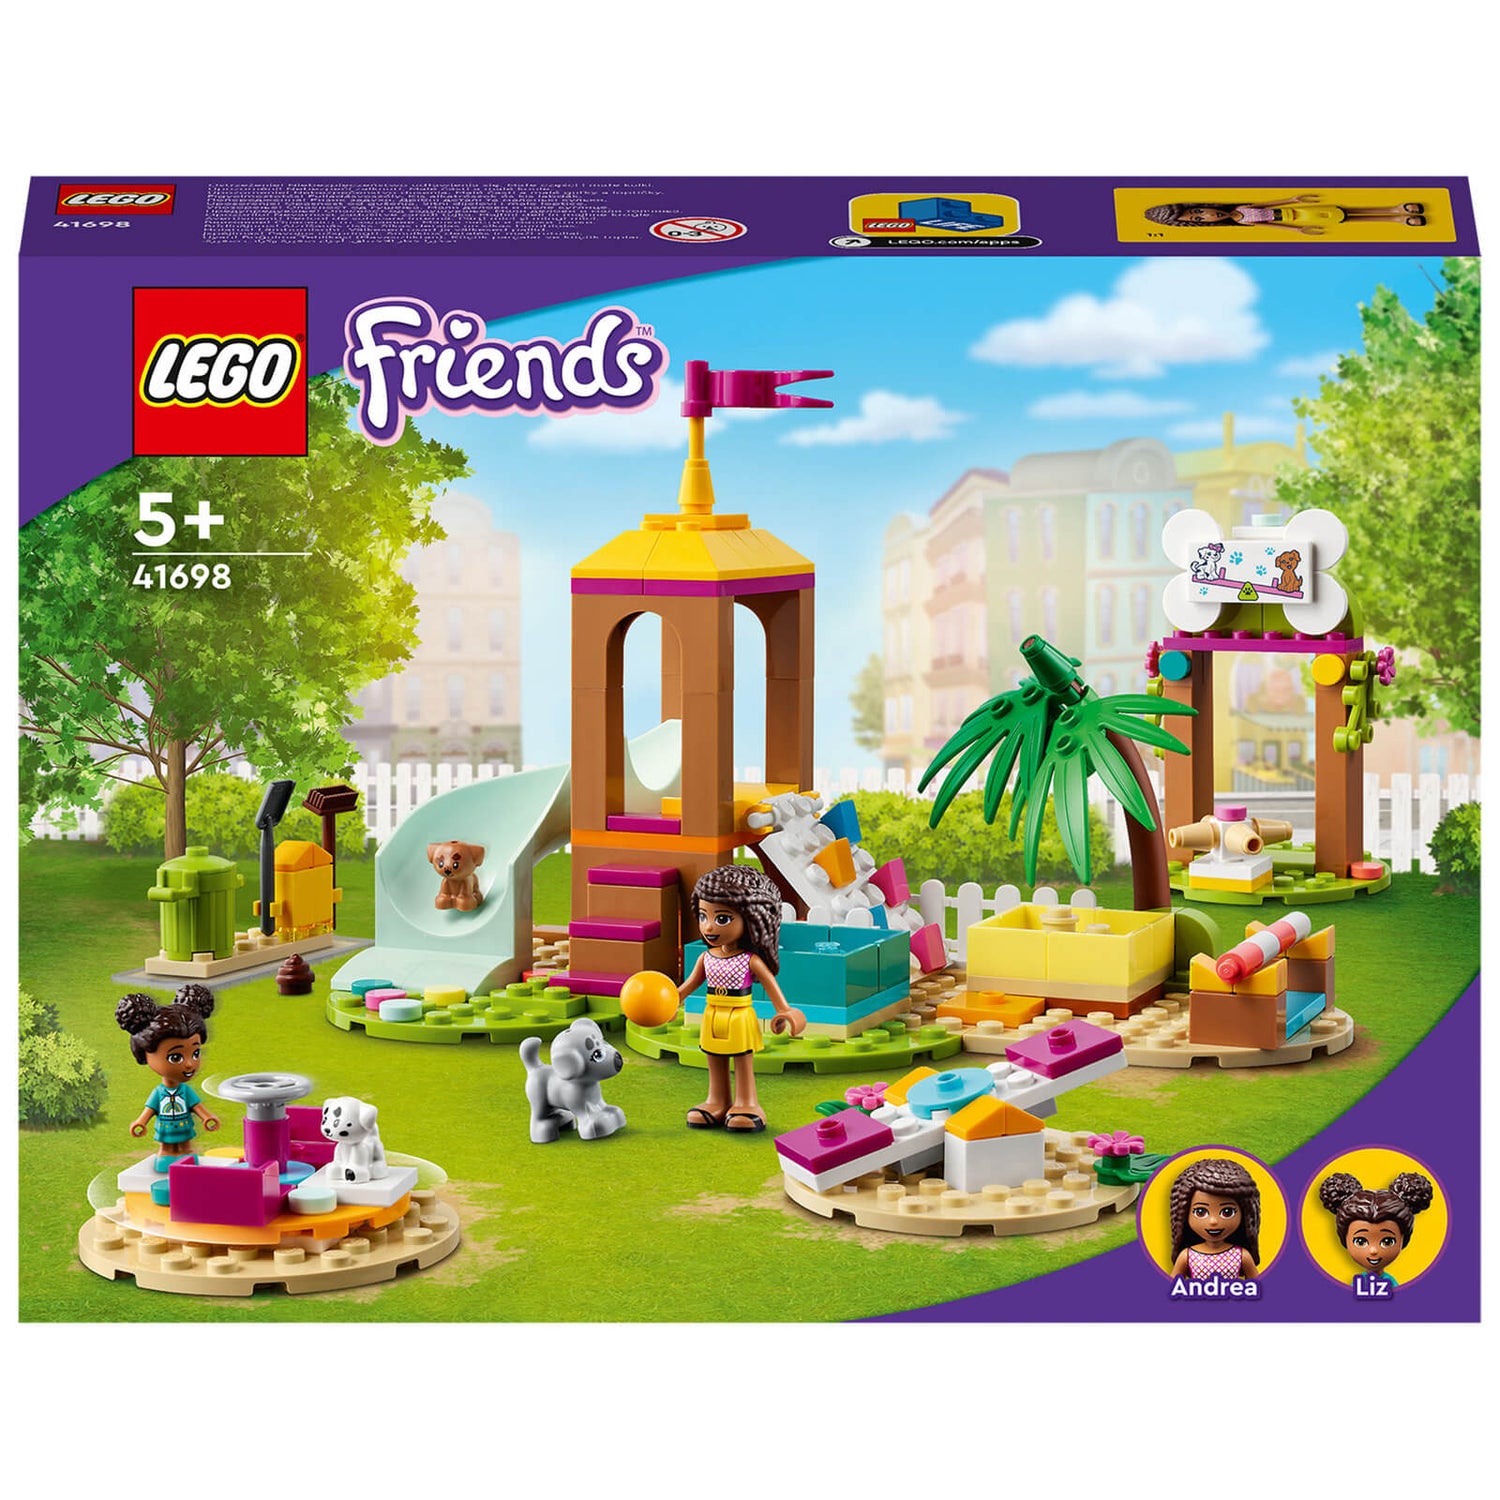 R tilbede Borger LEGO Friends: Pet Playground Puppy Play Set with Andrea (41698) Toys -  Zavvi US